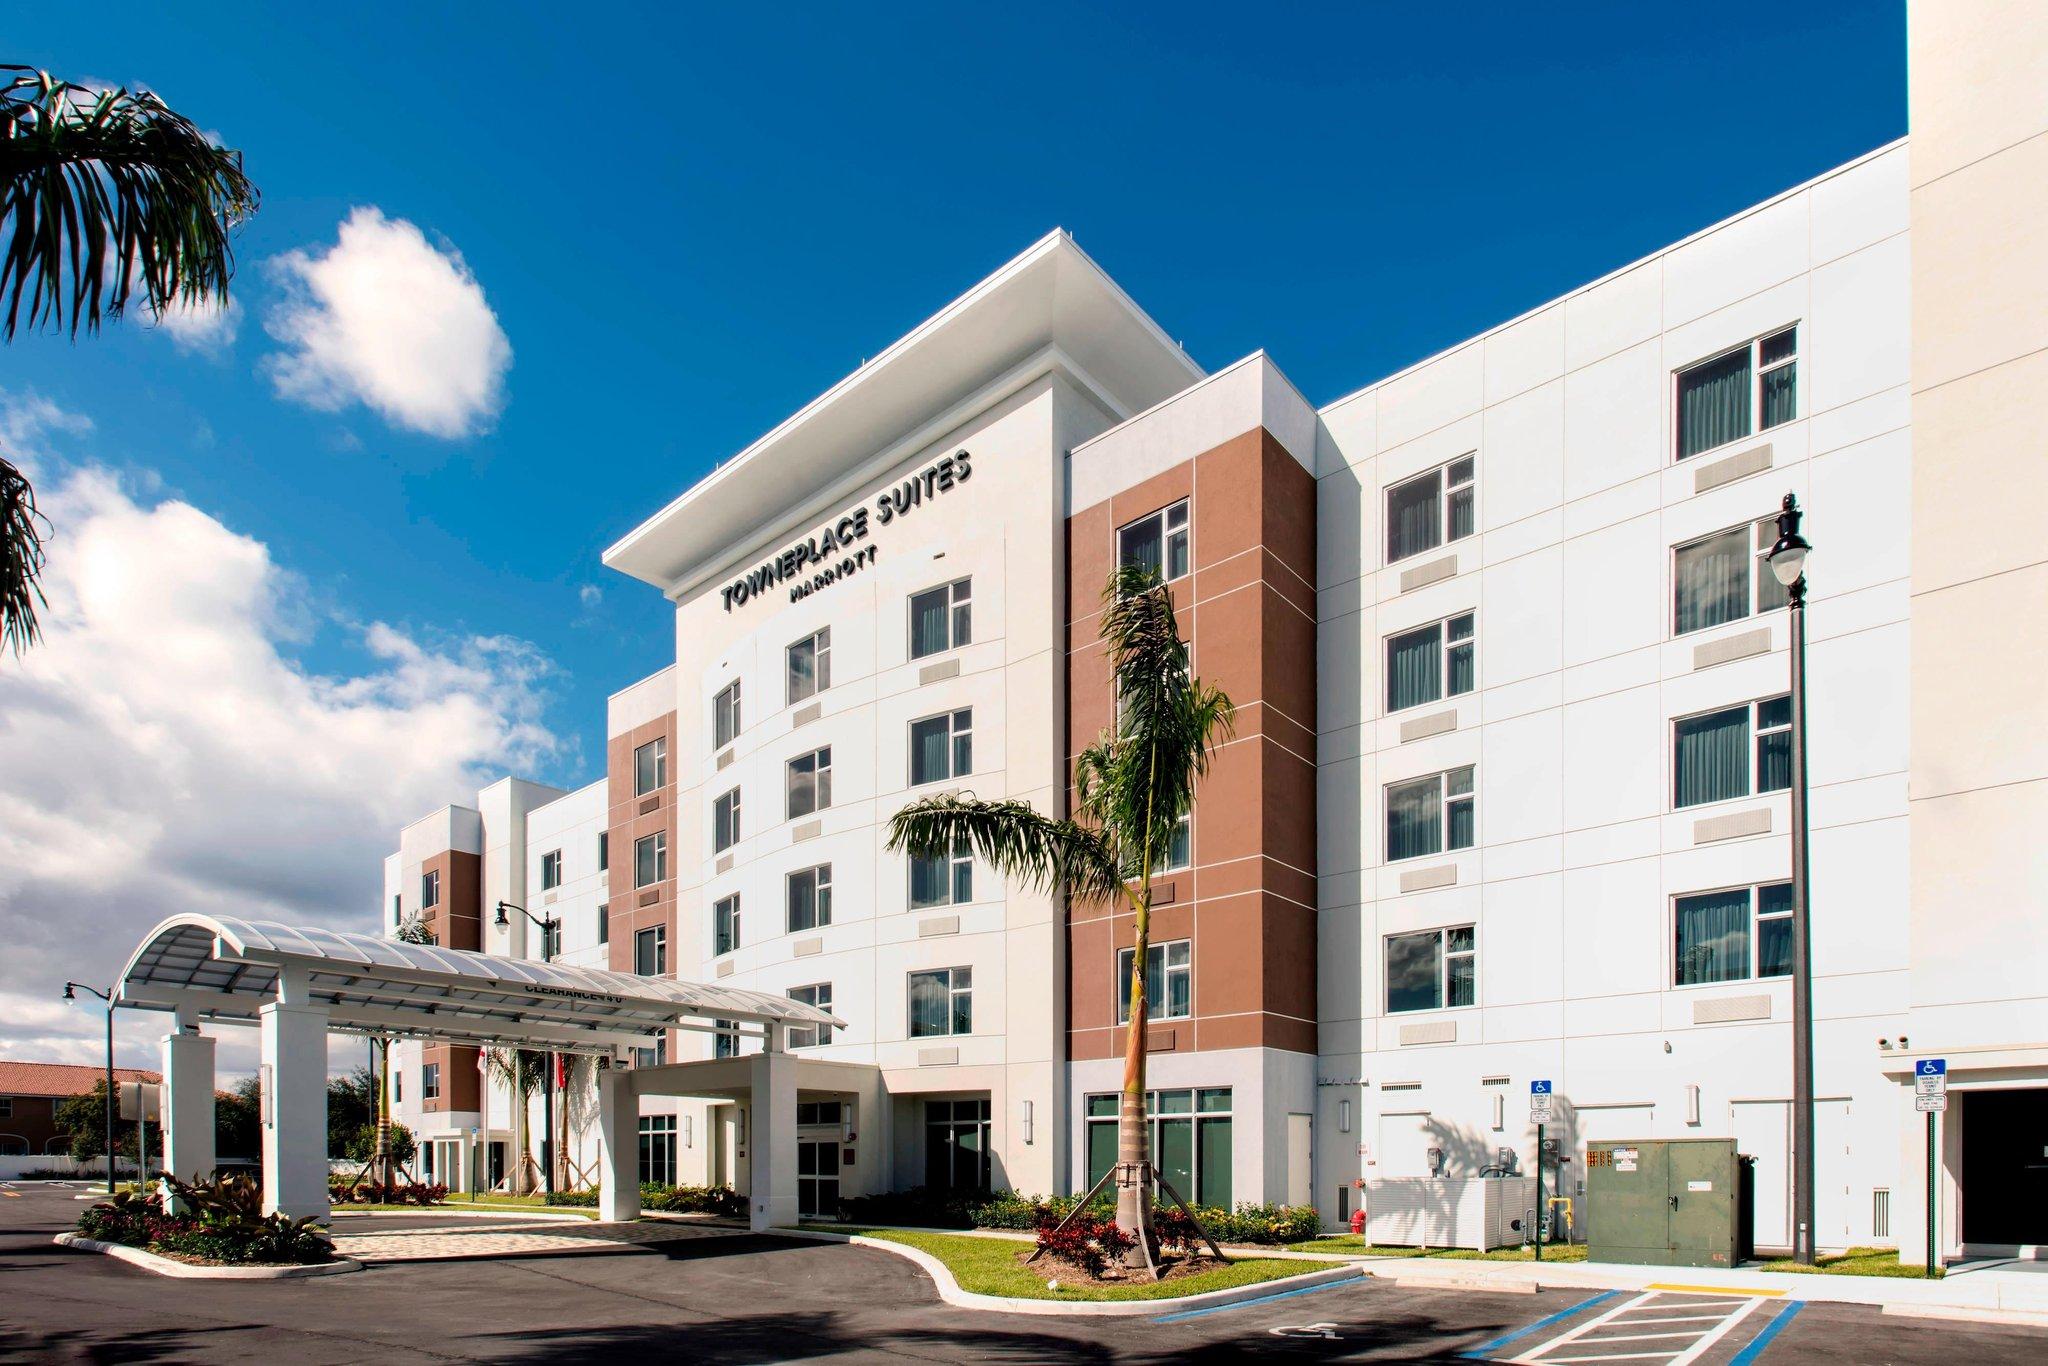 TownePlace Suites Miami Homestead in Homestead, FL